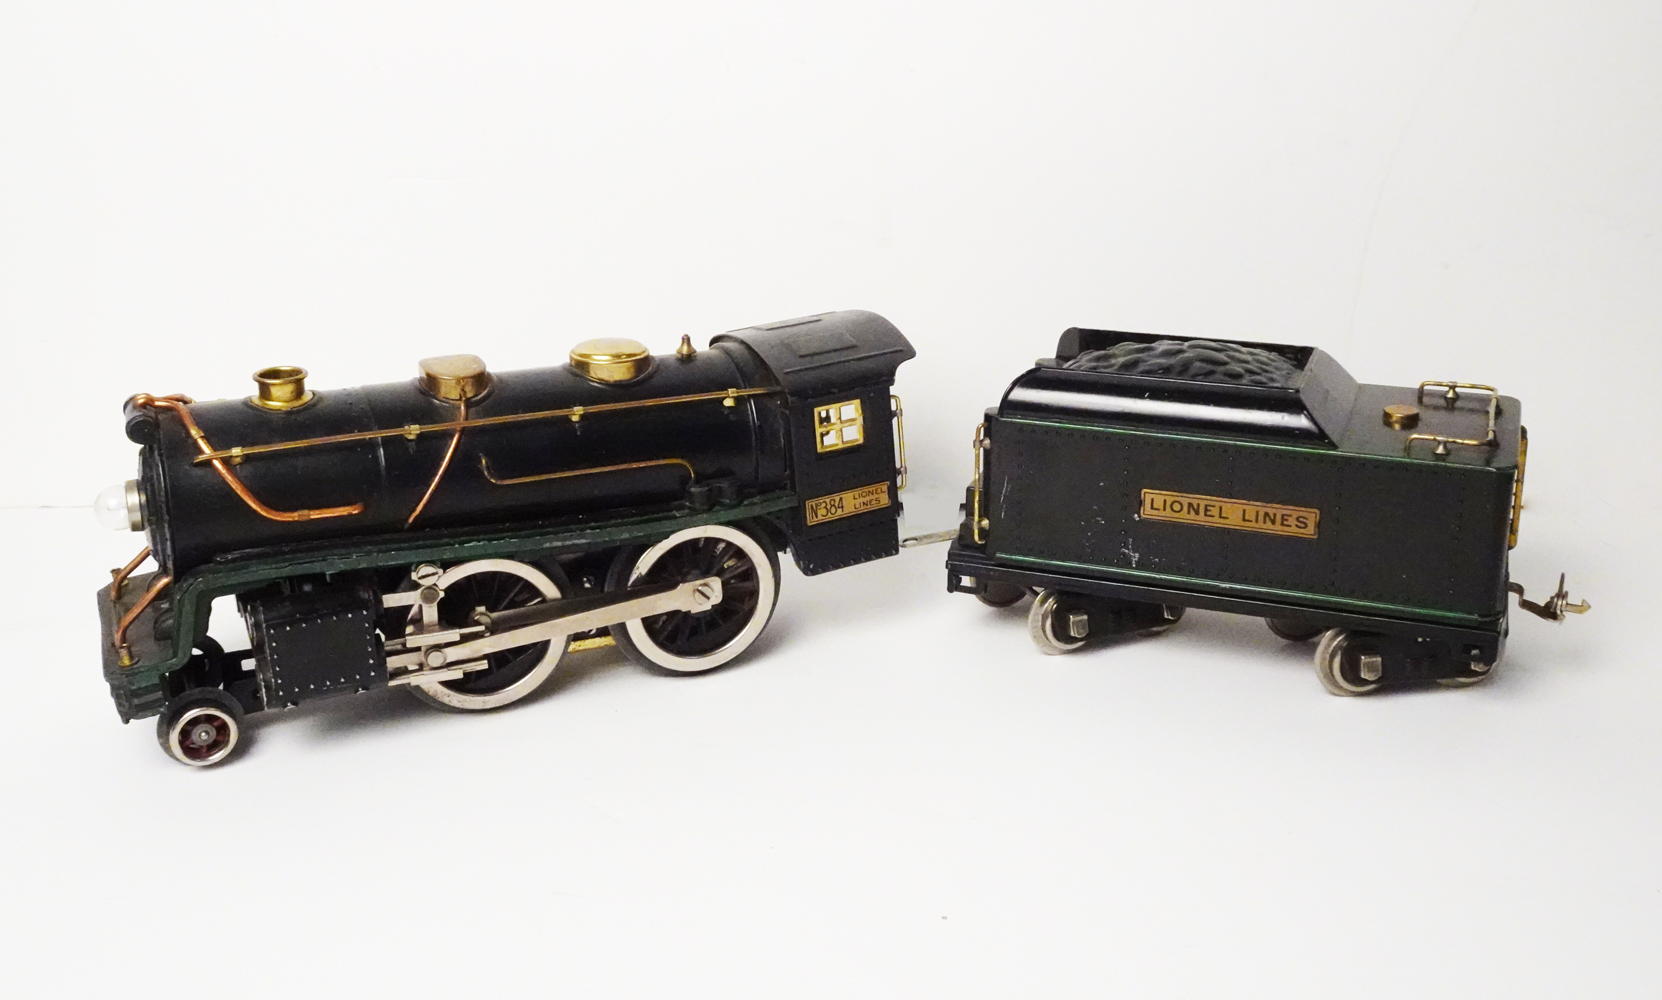 1930s Lionel standard-gauge steam engine #385 with #384-T tender. G to VG condition. Est. $250-$500. Image courtesy of Stephenson’s Auction